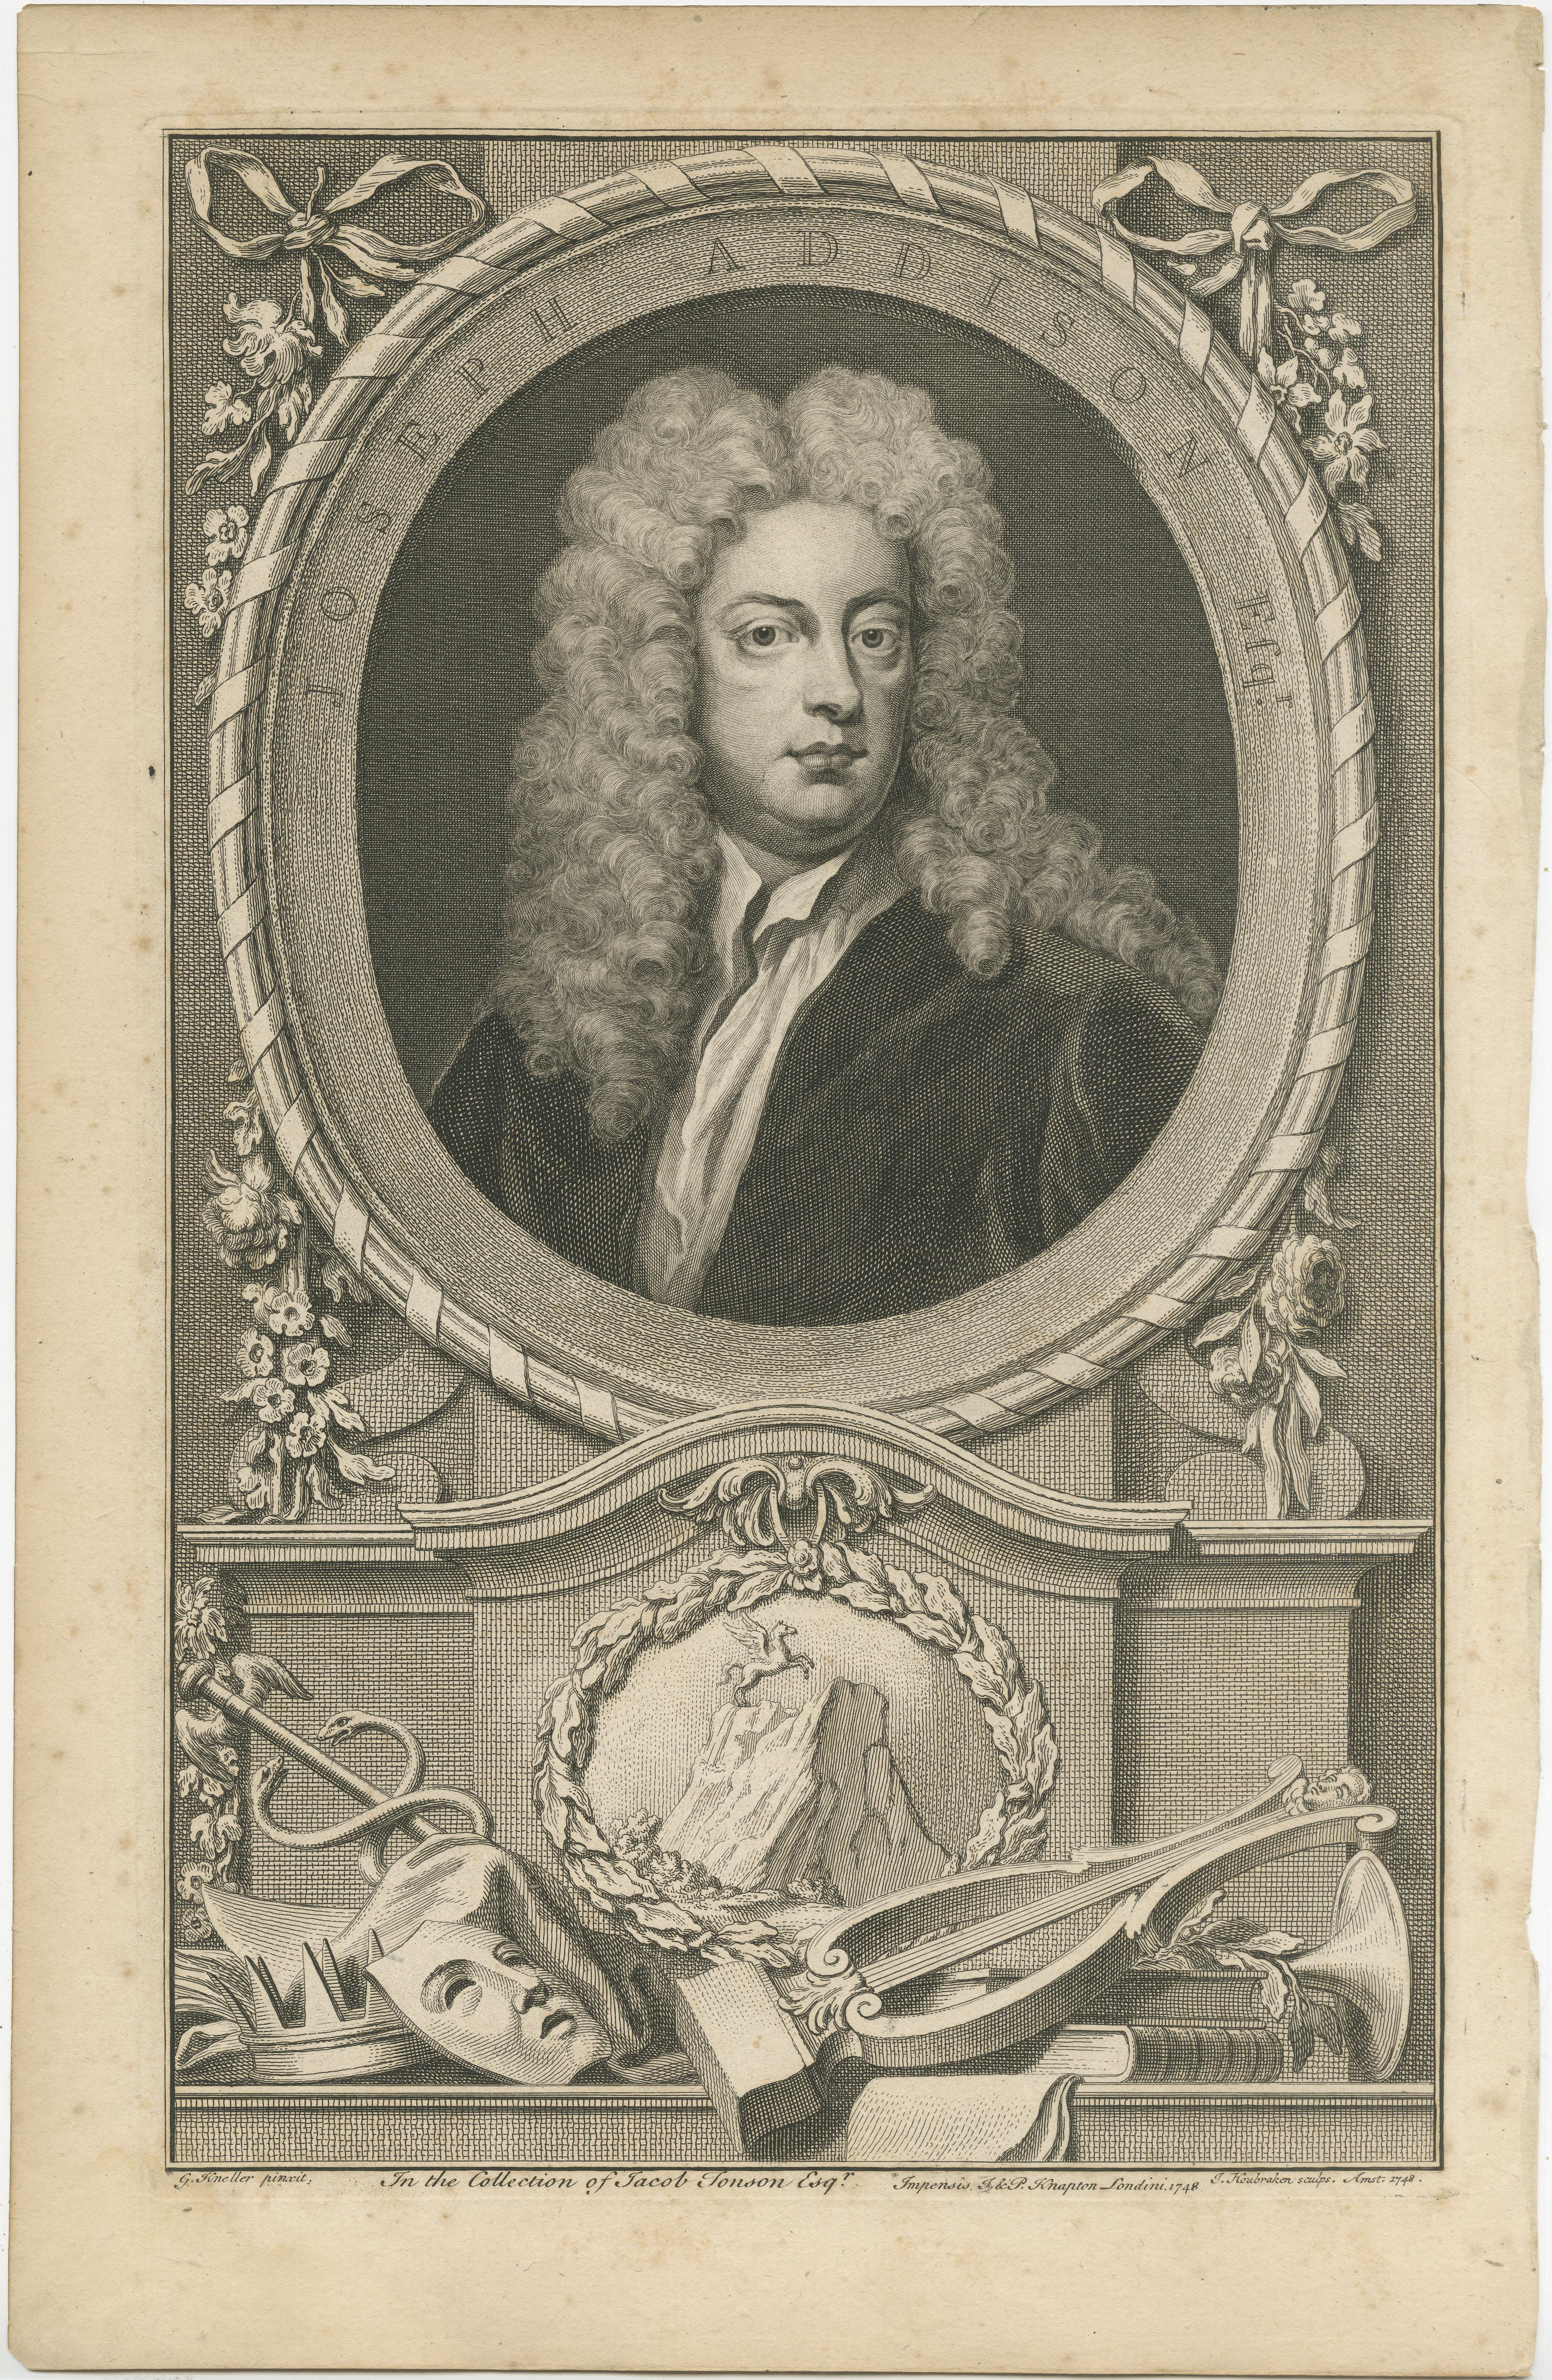 Antique portrait titled 'Joseph Addison Esqr.'. Old print of Joseph Addison, English essayist, poet, playwright and politician. It depicts a bust portrait of Addison in an ornamental oval. He is turned to his right, but he is looking directly at the